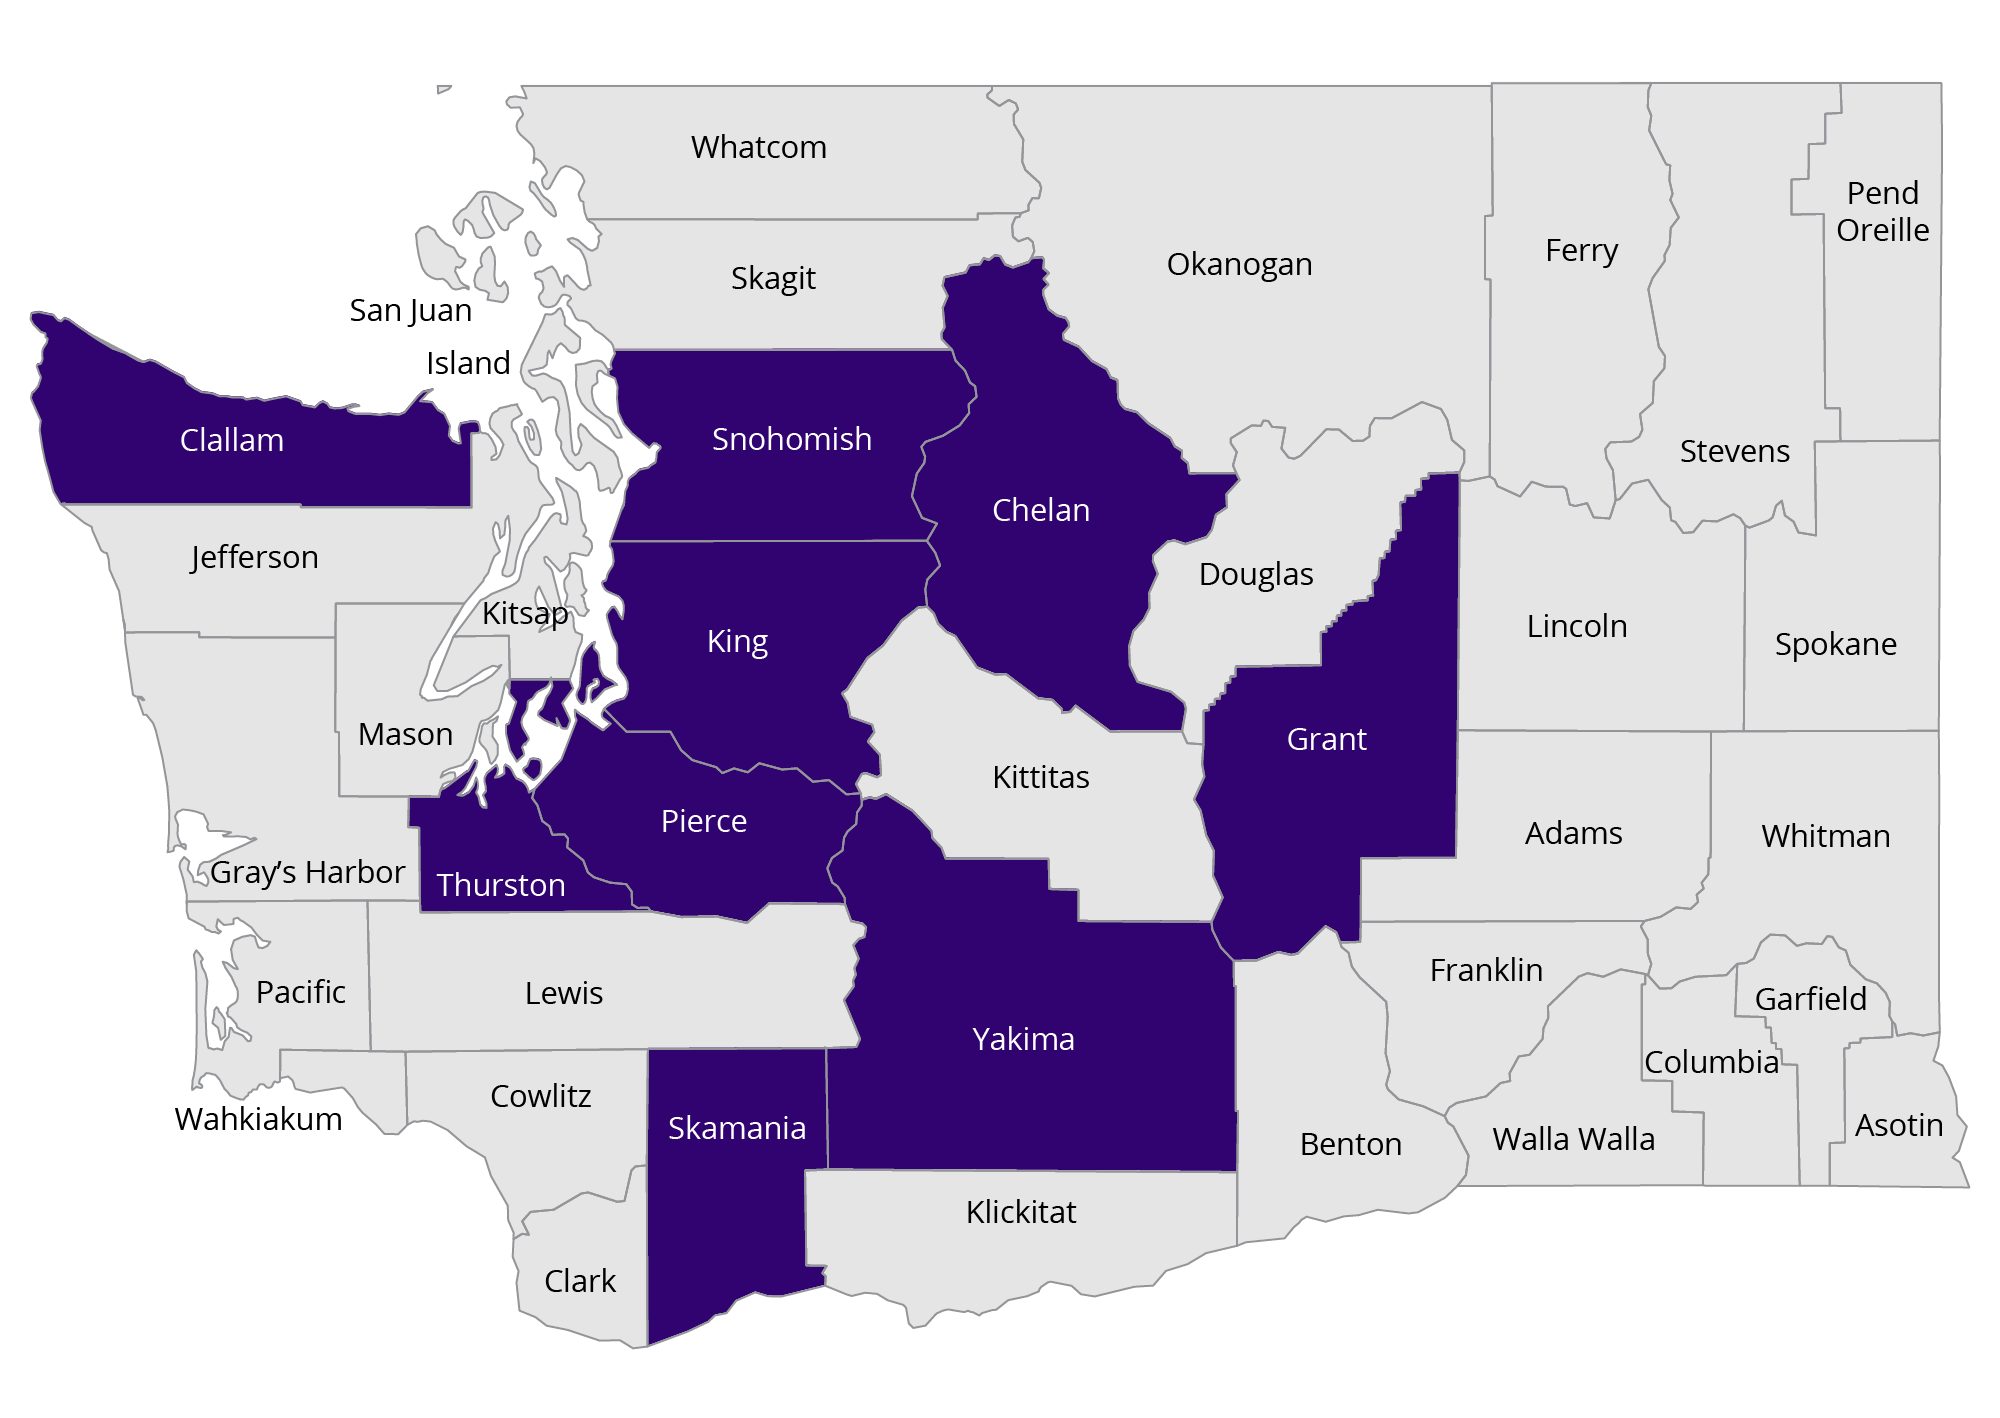 The Northwest Center for Occupational Health and Safety works in the following Washington counties: Chelan, Clallam, Grant, King, Pierce, Skamania, Snohomish, Thurston, and Yakima.